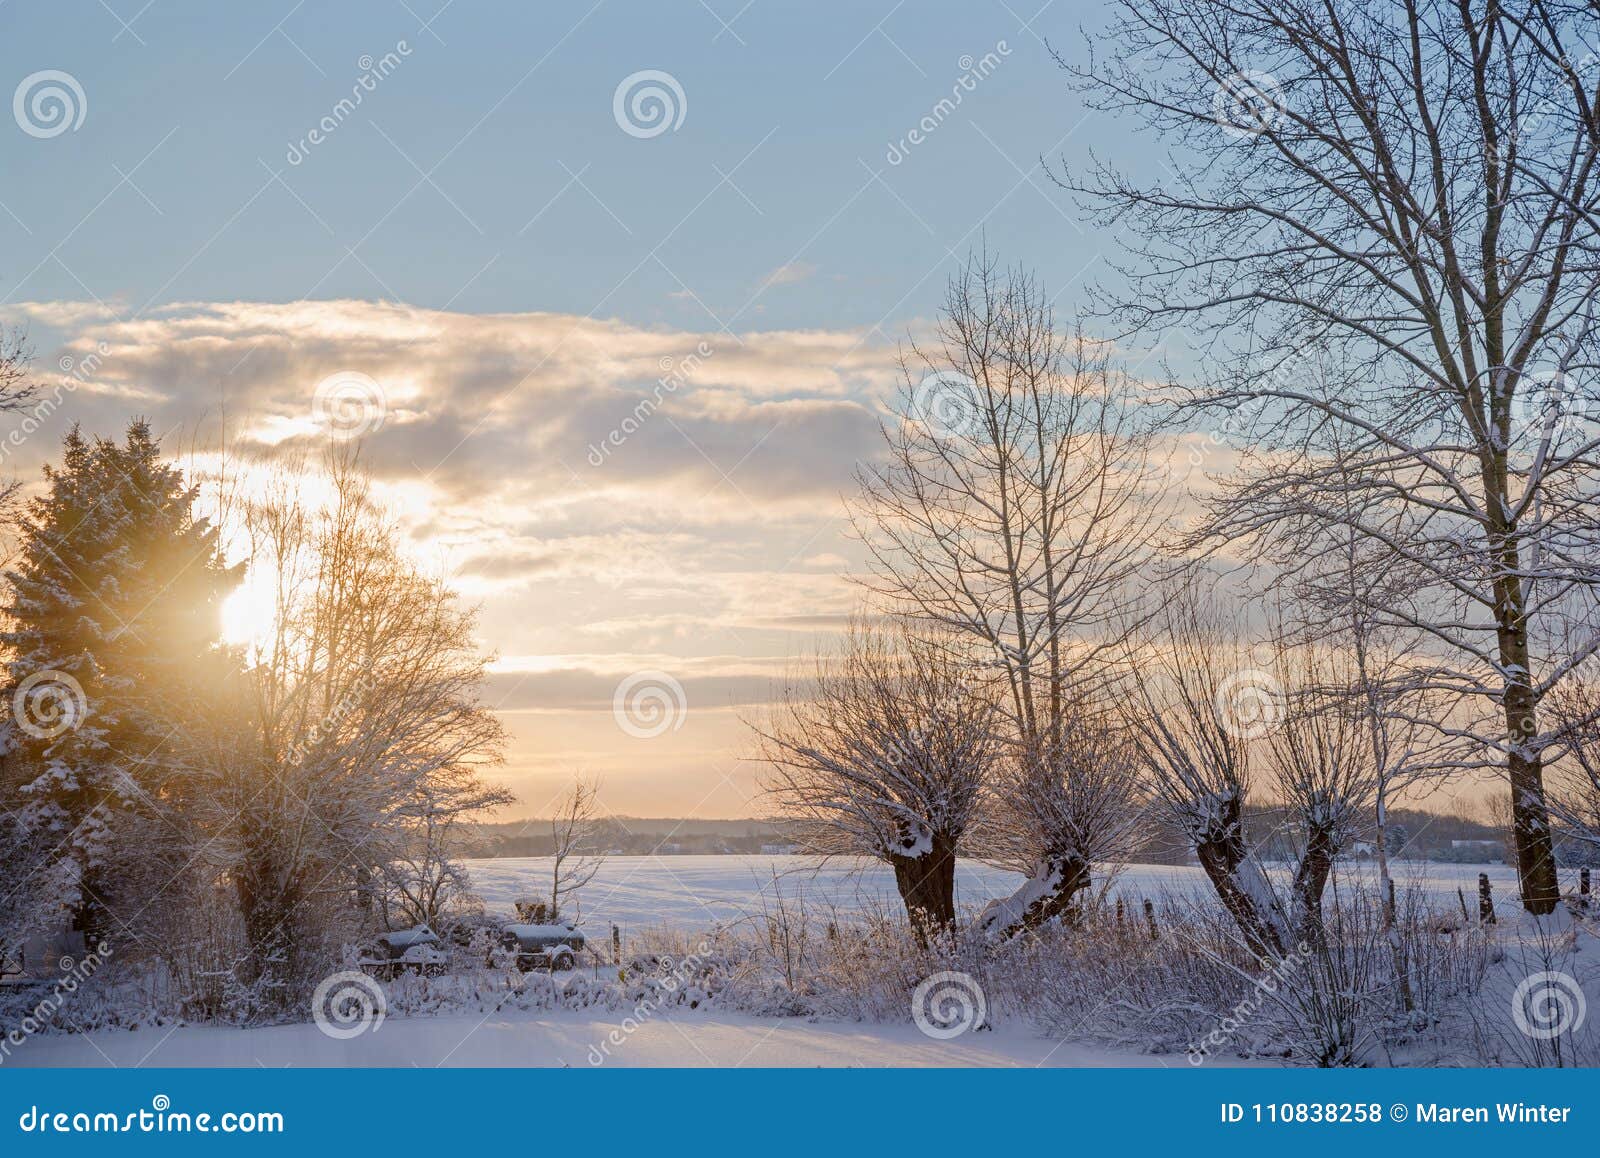 Download Sunrise A Beautiful Winter Morning In The Countryside Rural Stock Image